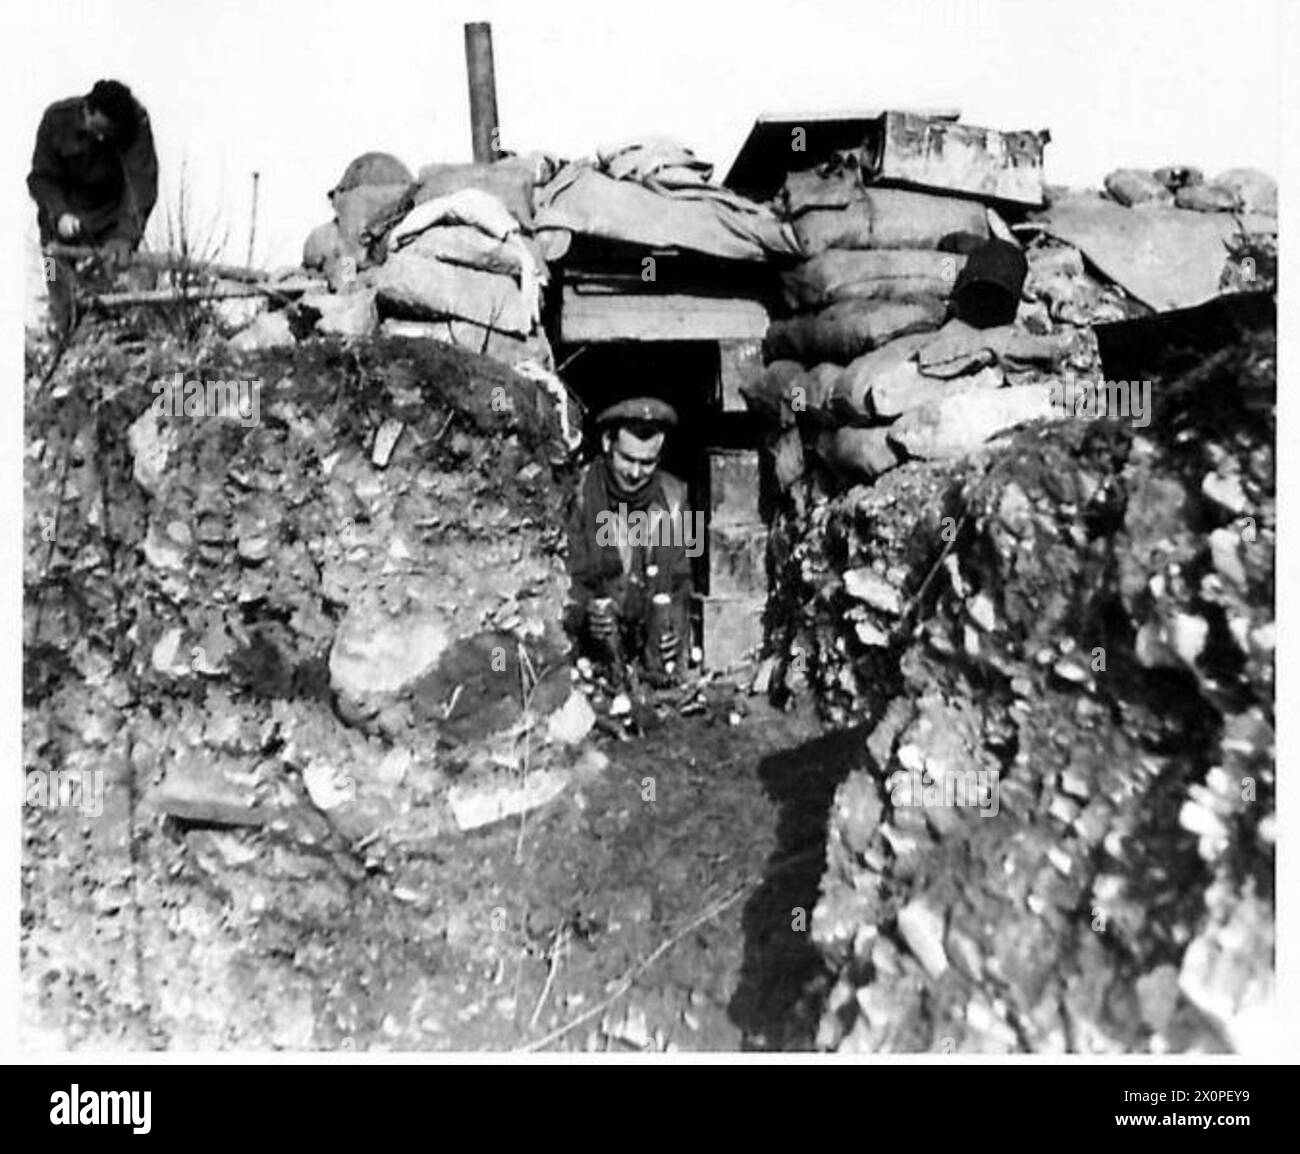 THE BRITISH ARMY IN NORTH AFRICA, SICILY, ITALY, THE BALKANS AND AUSTRIA 1942-1946 - Gnr. Doran of 37 Waverly Road, Exmouth, Devon collecting wood which he keeps handy in his doorway. All of these shelters have stoves. Photographic negative , British Army Stock Photo